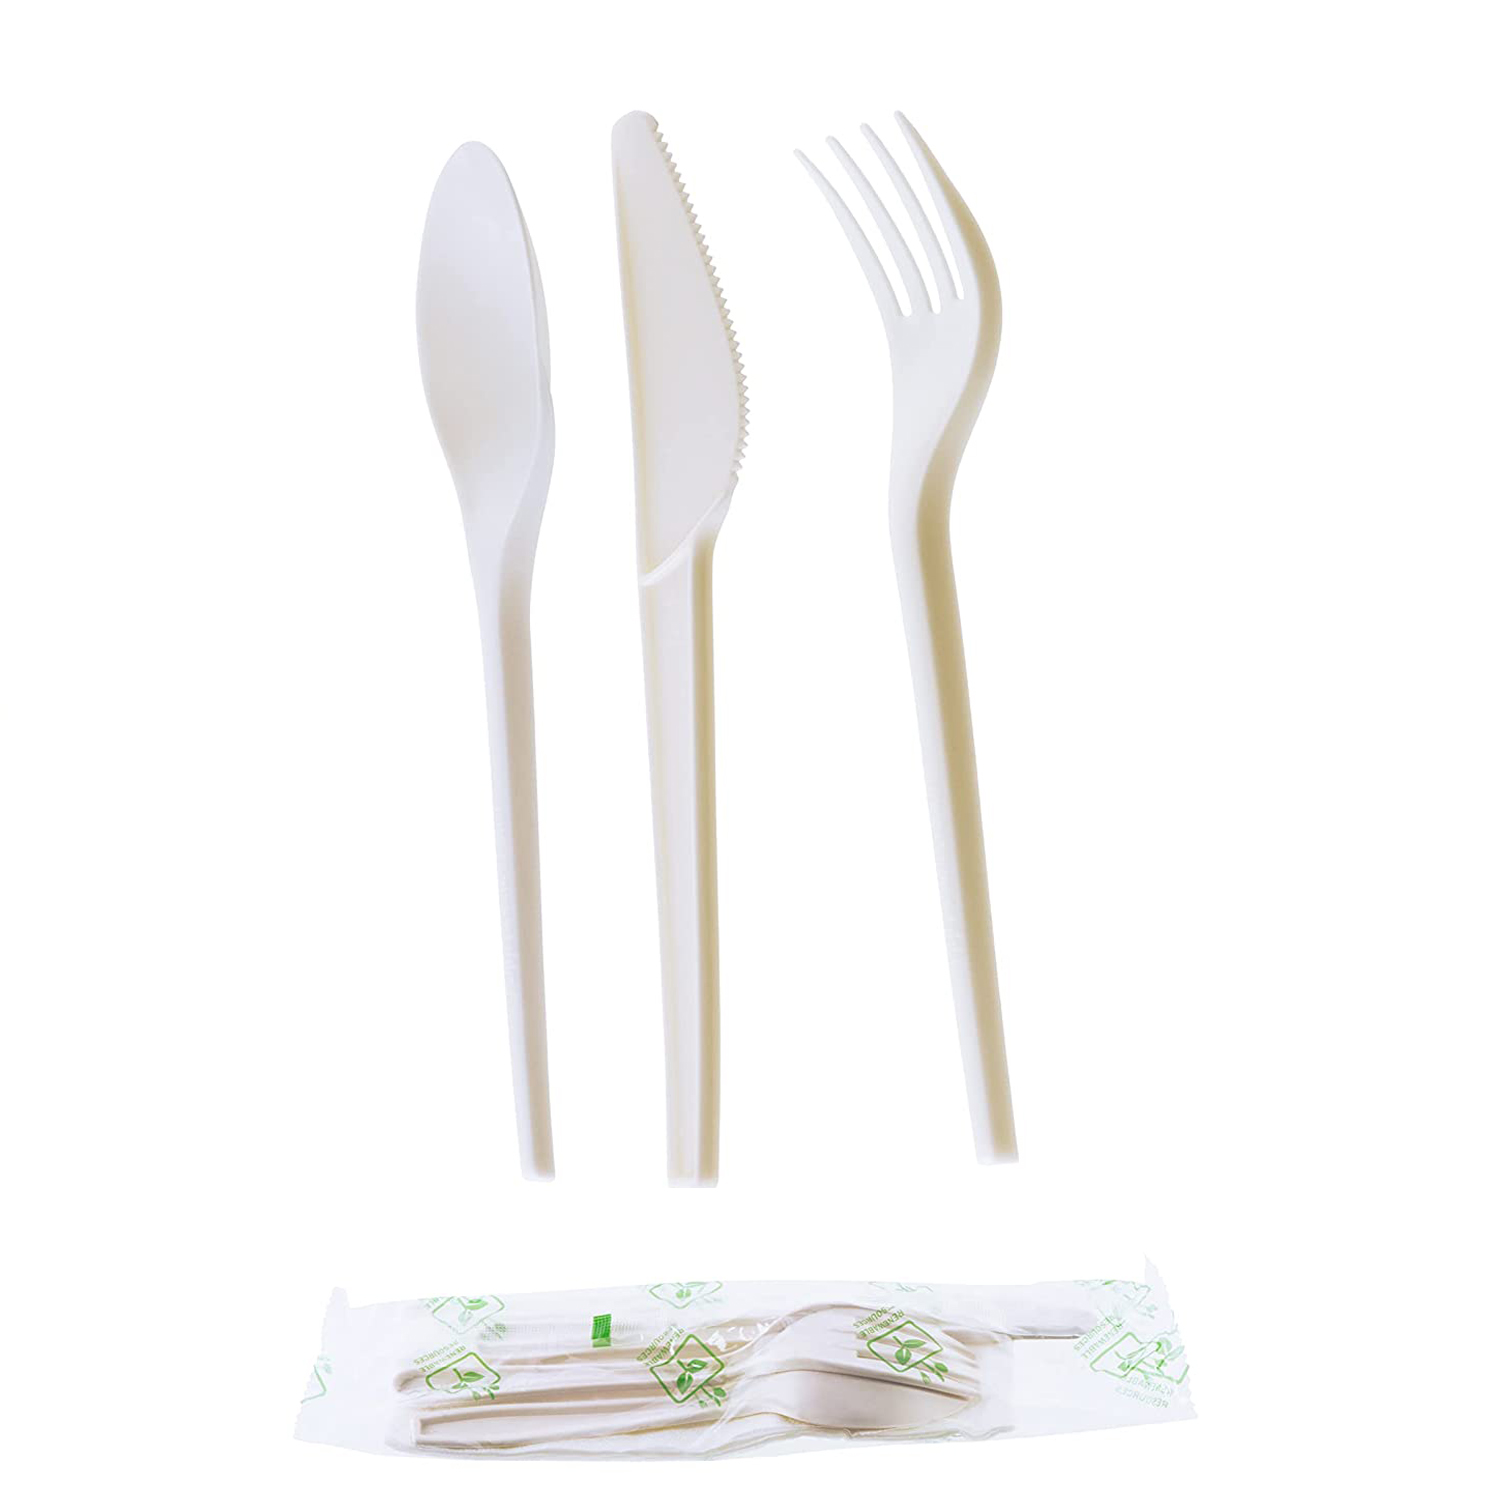 Fork, Knife, Spoon, and Napkin 4 pc PLA Cutlery Set Indiv. Wrapped in OXO  Biodegradable Plastic 7in - 250 pcs